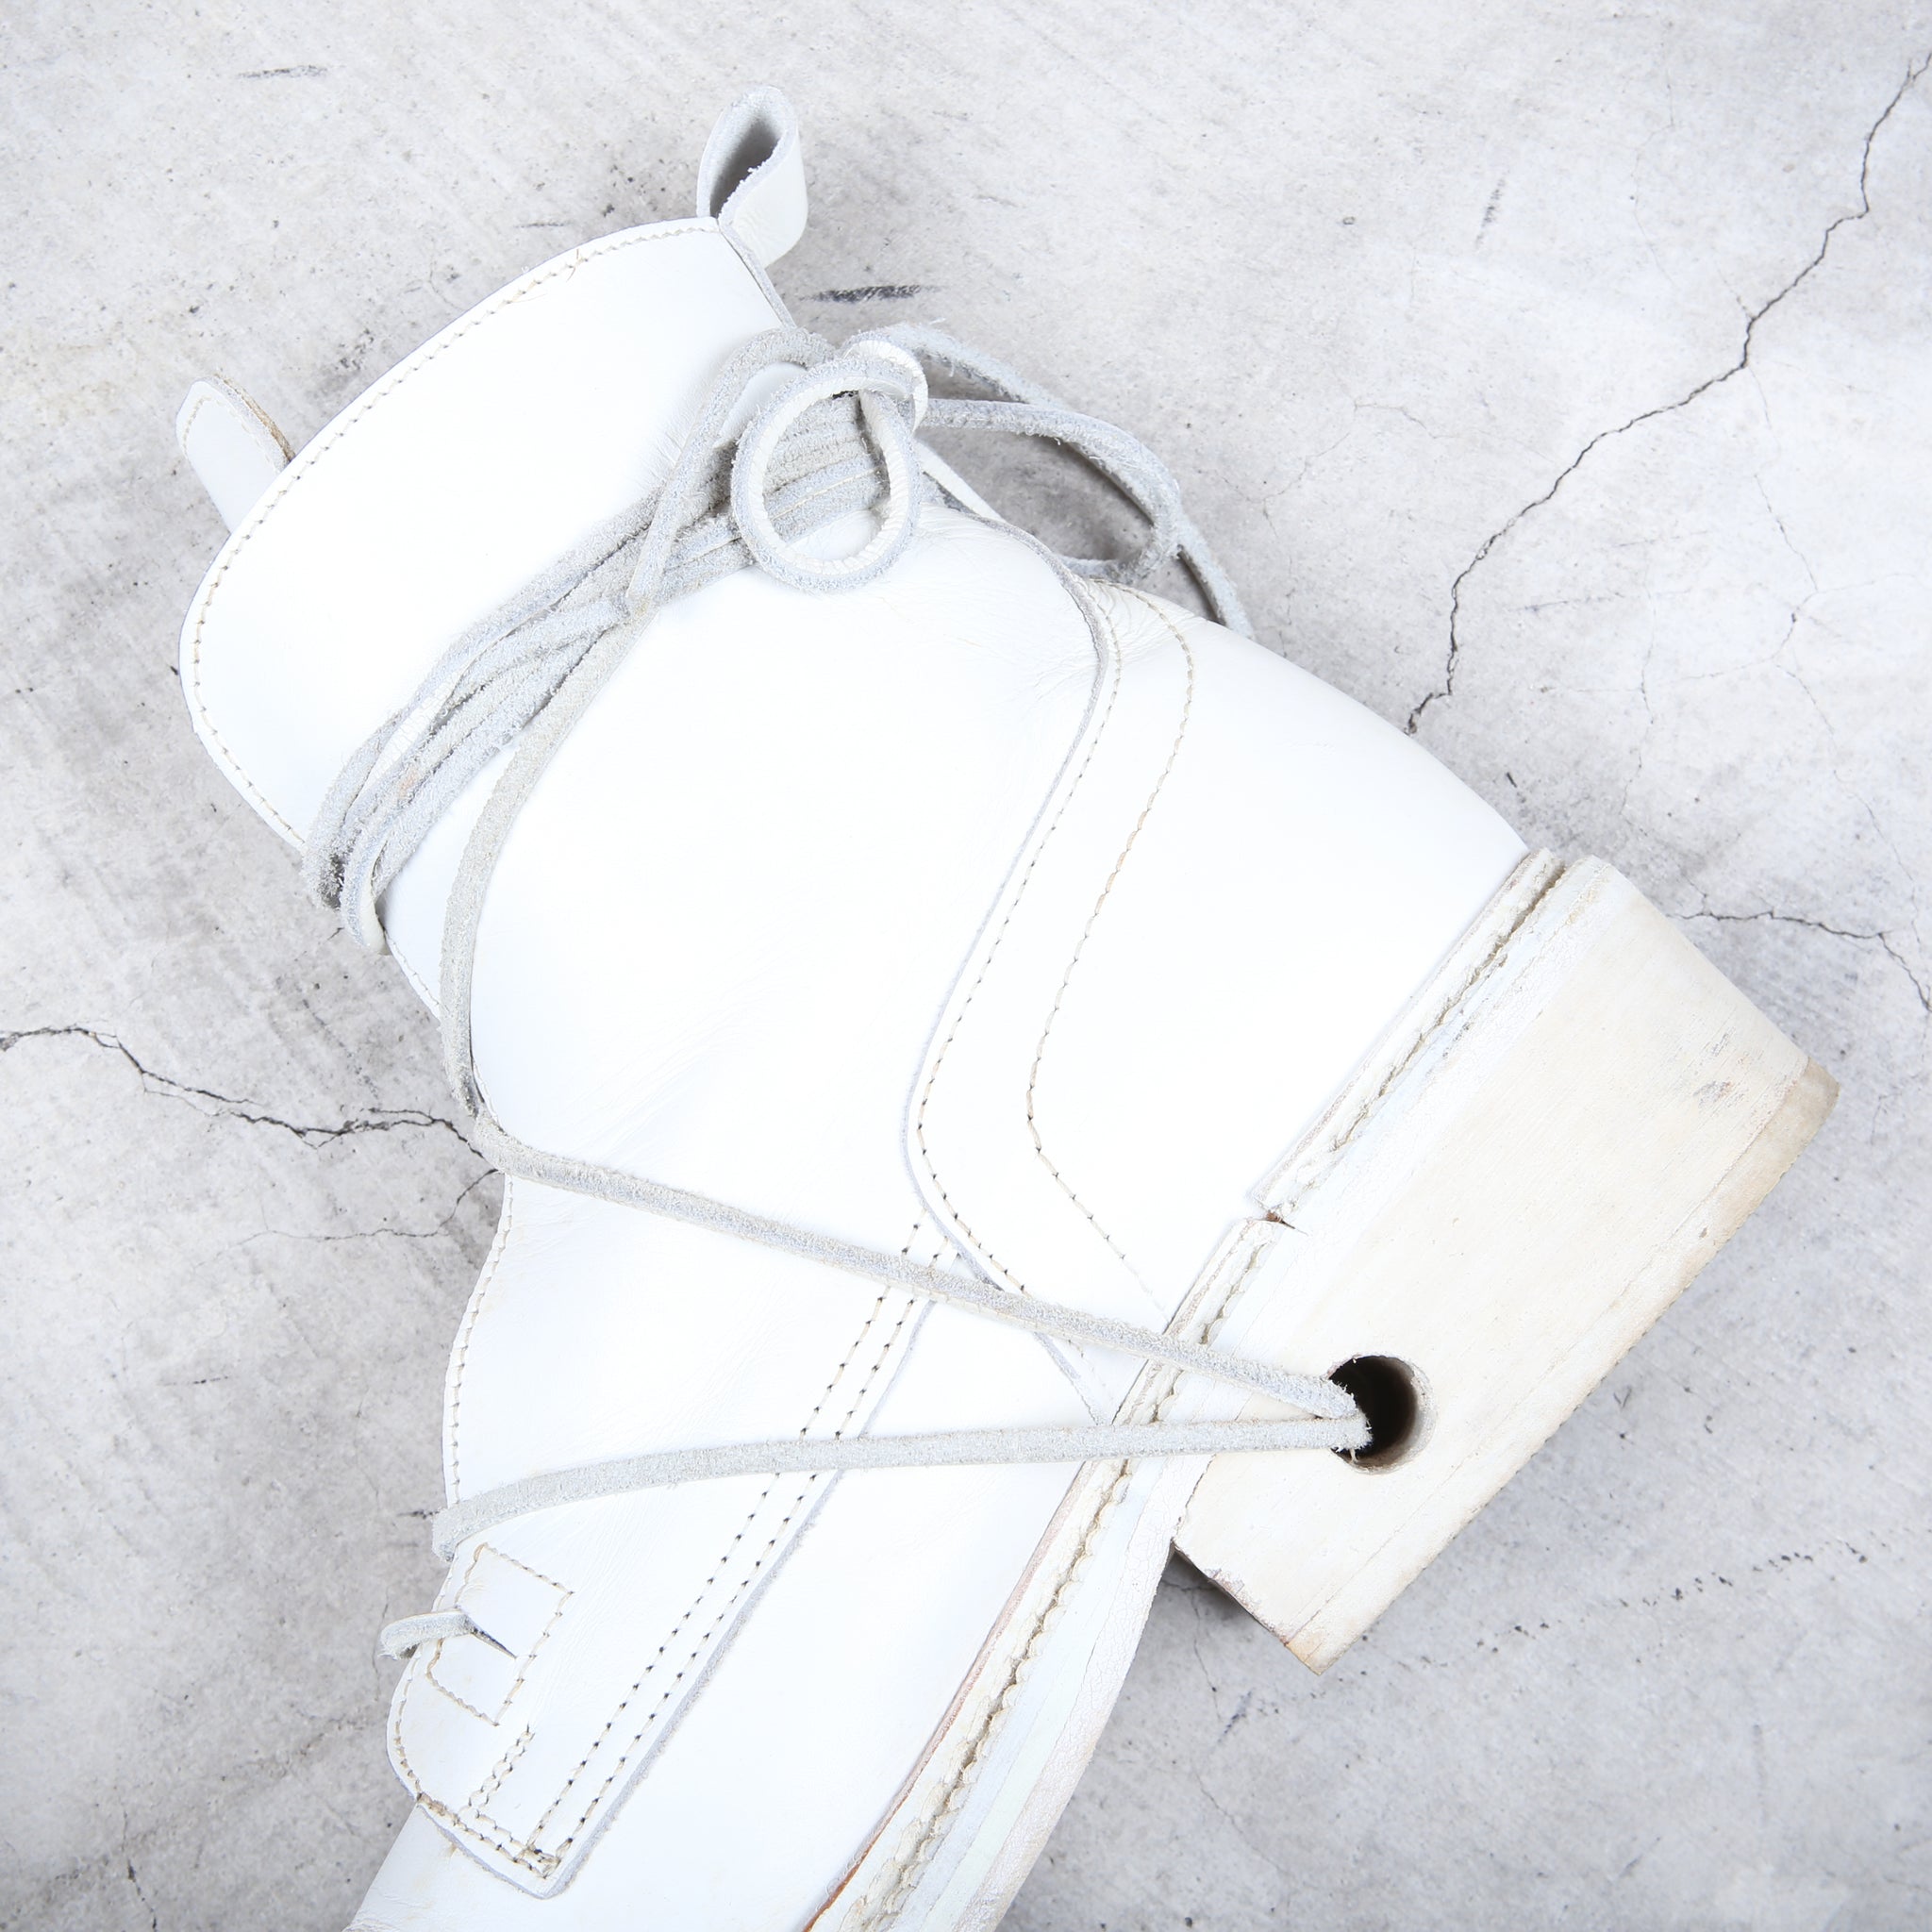 Dirk Bikkembergs White Lace through Heel Woden Stacked boot Size 42